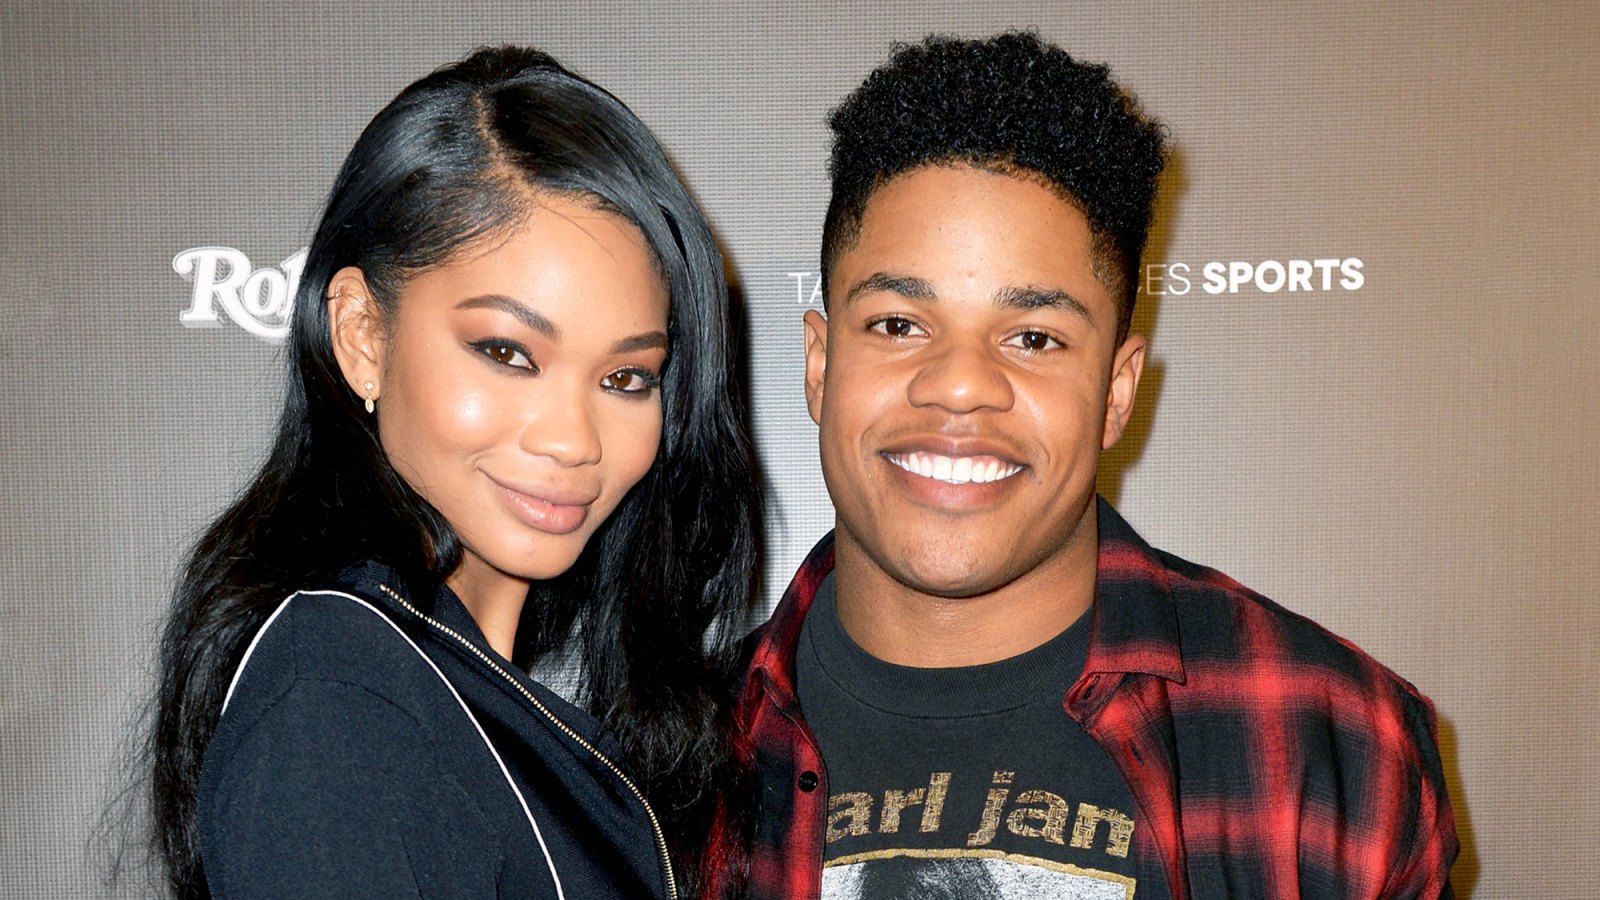 Chanel Iman and Sterling Shepard at the 2017 Rolling Stone Live: Houston presented by Budweiser and Mercedes-Benz in Houston, Texas.